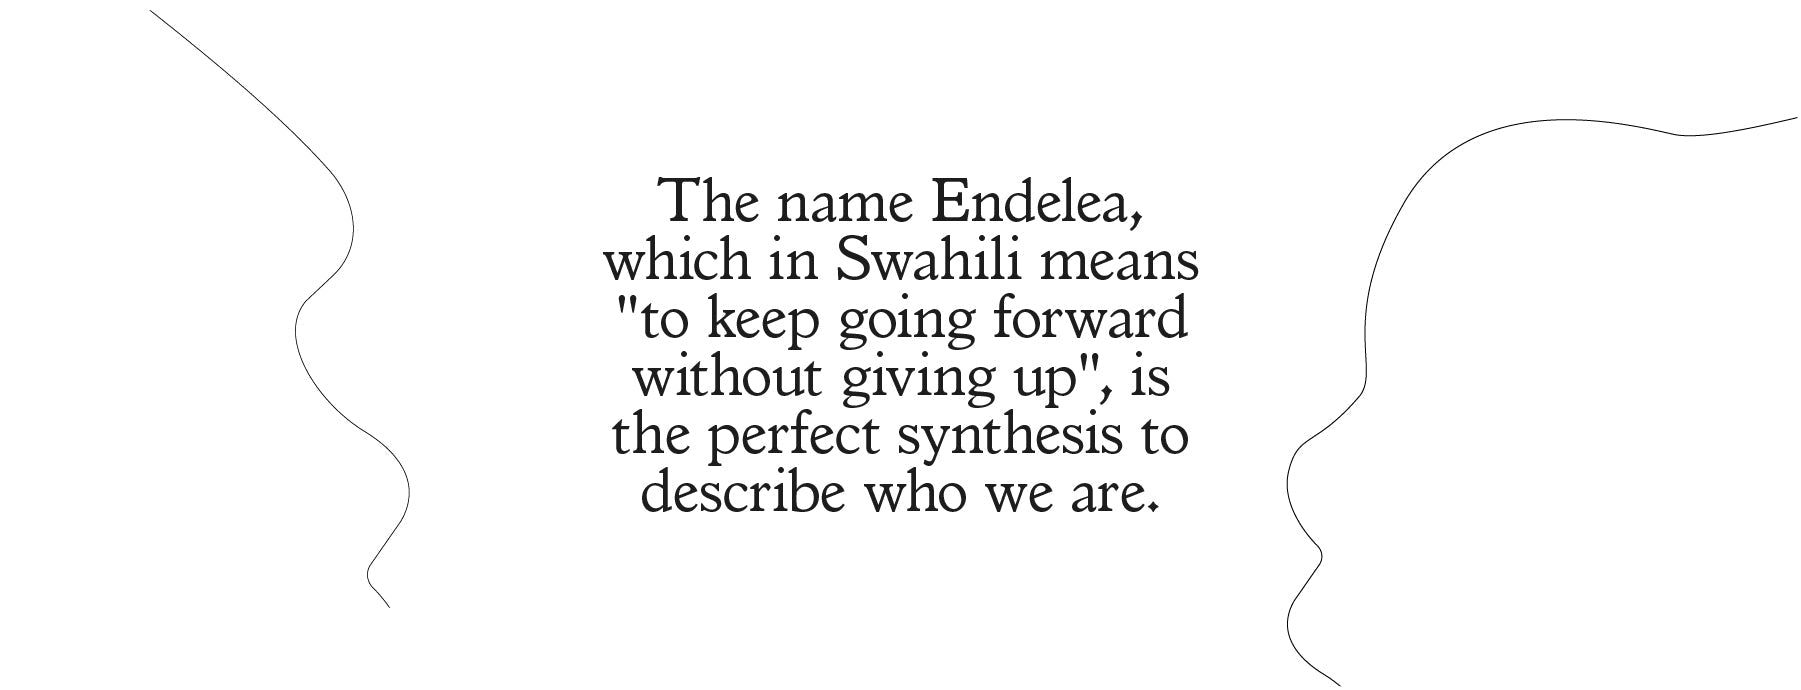 The name Endelea, which in Swahili means "to keep going forward without giving up", is the perfect synthesis to describe who we are. 